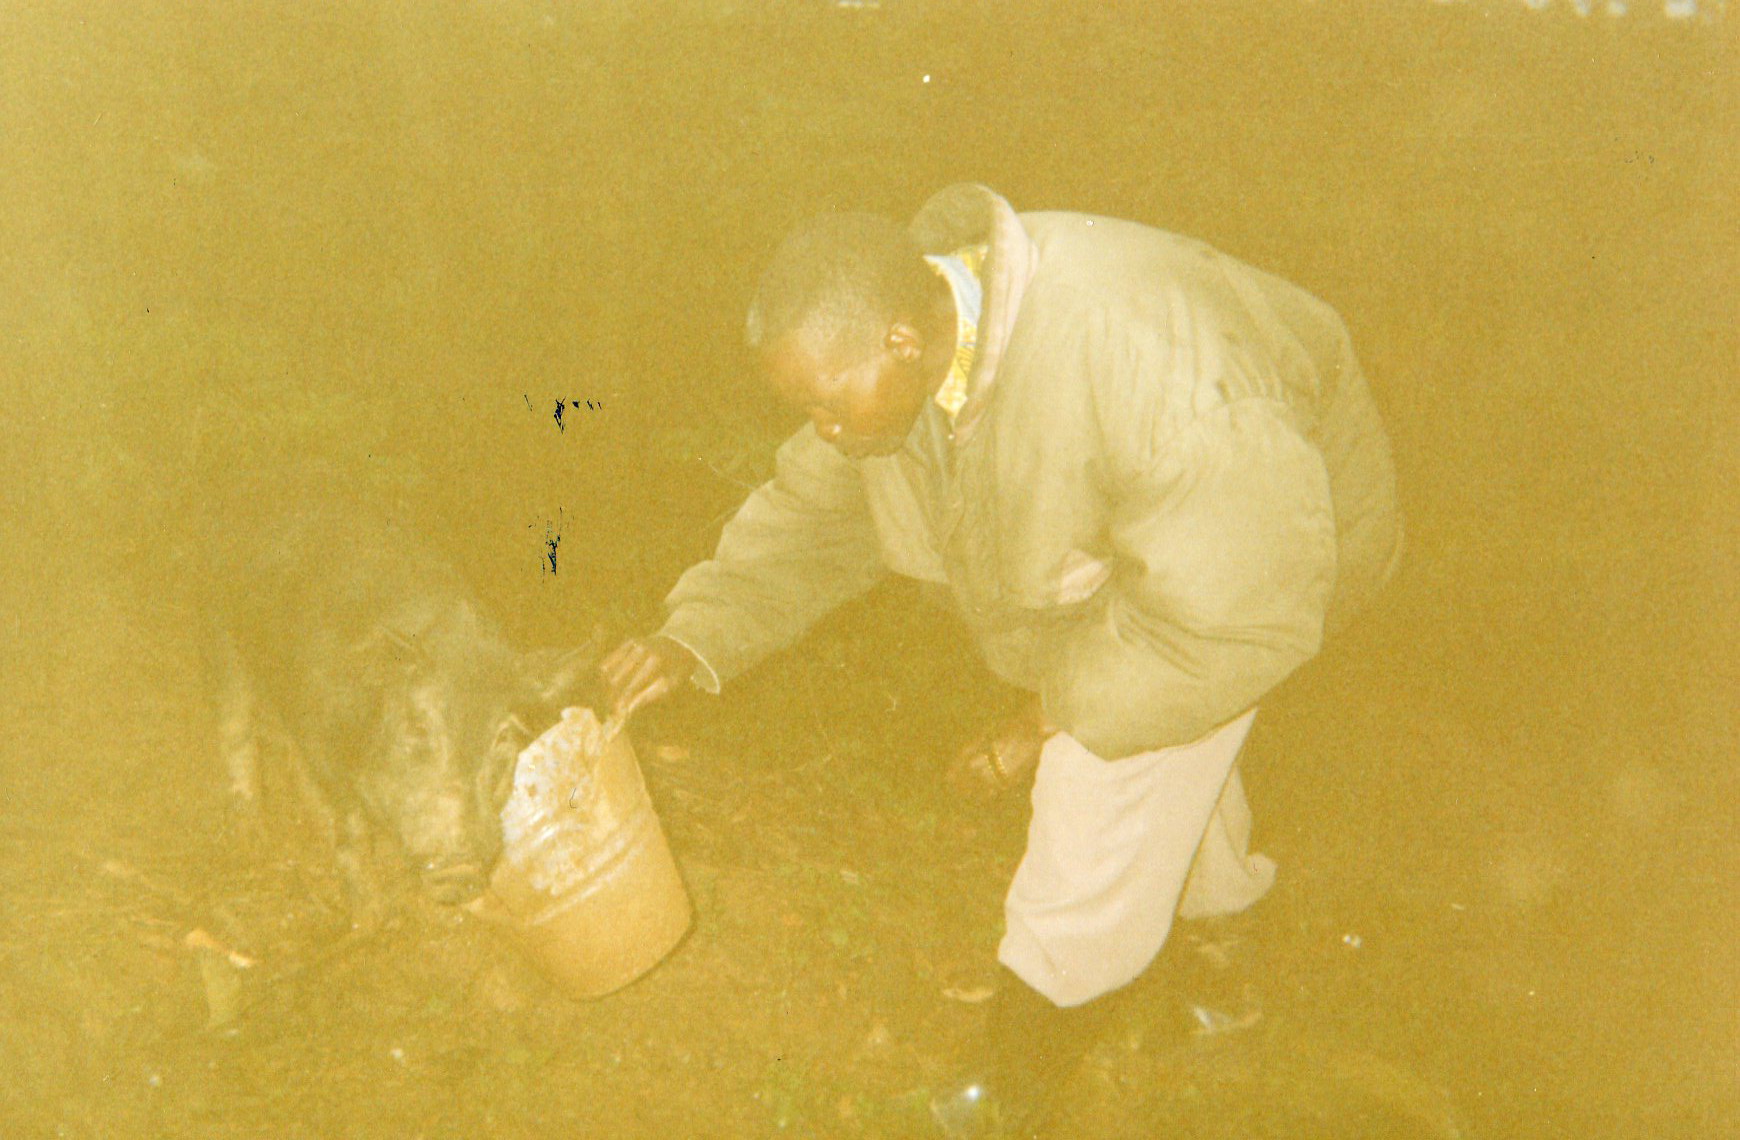  A father who raises pigs to pay for his children's school fees.&nbsp; 